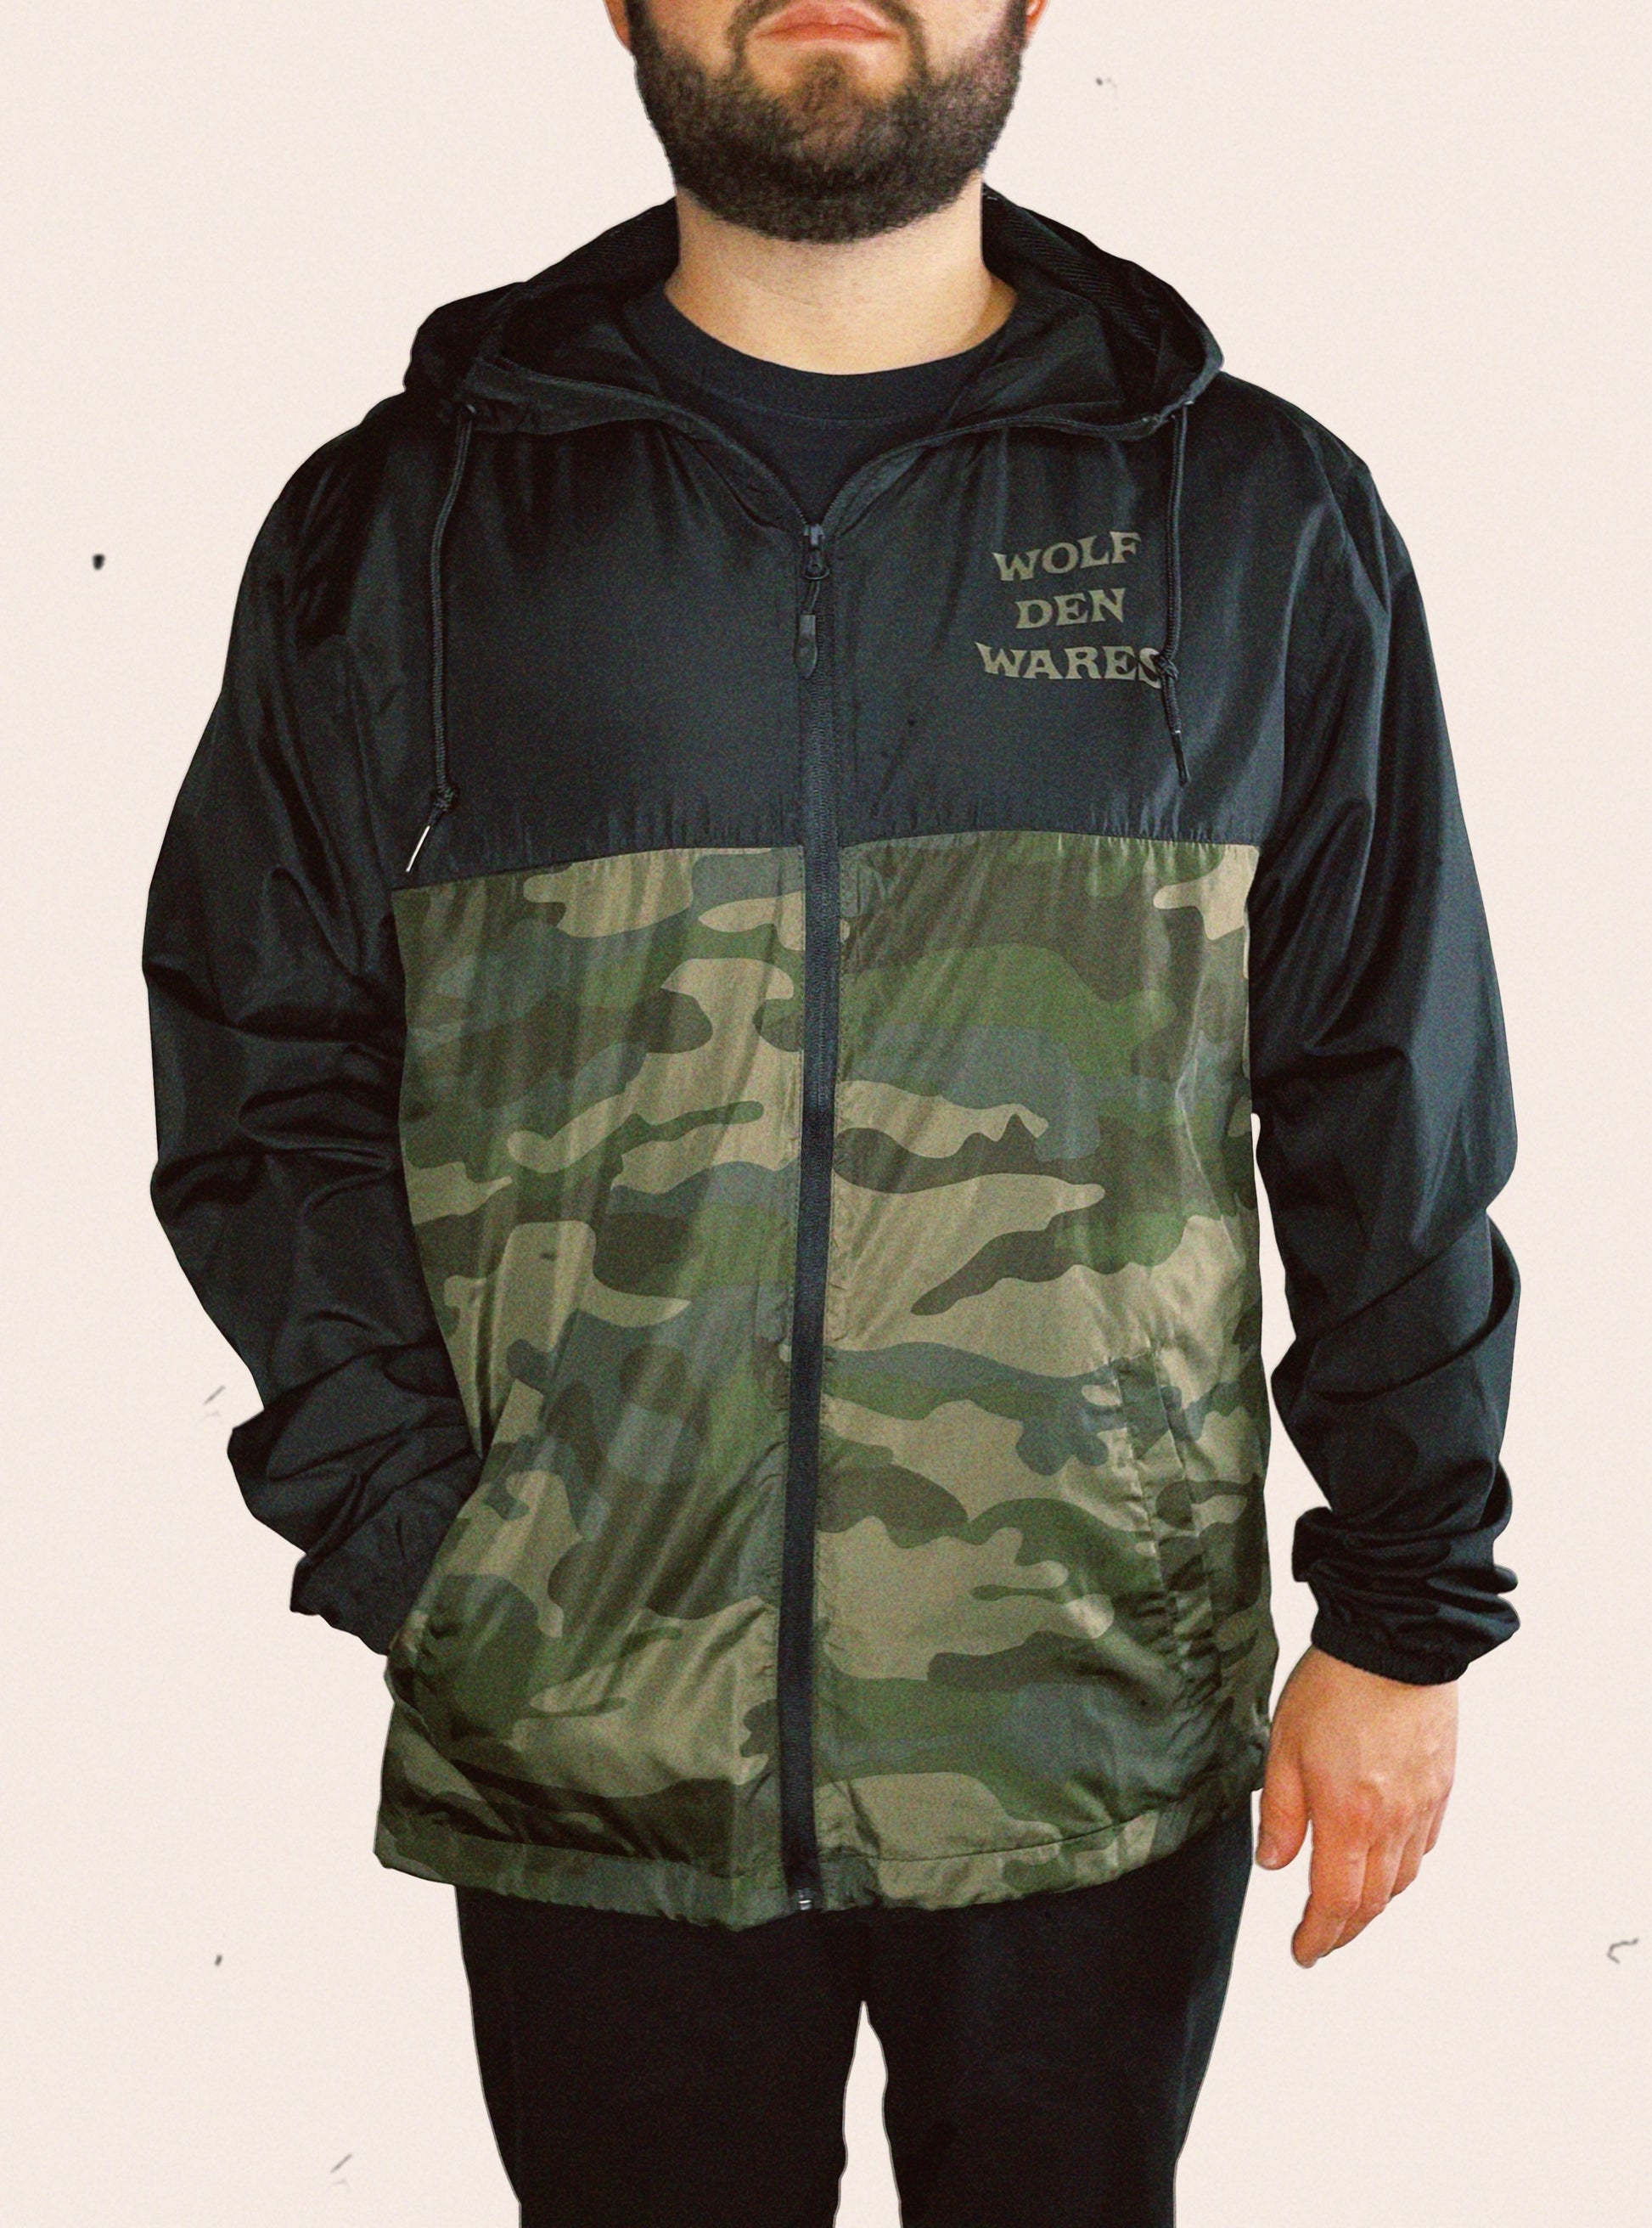 Hooded black and camo Independent Trading Company embellished with Wolf Den Wares